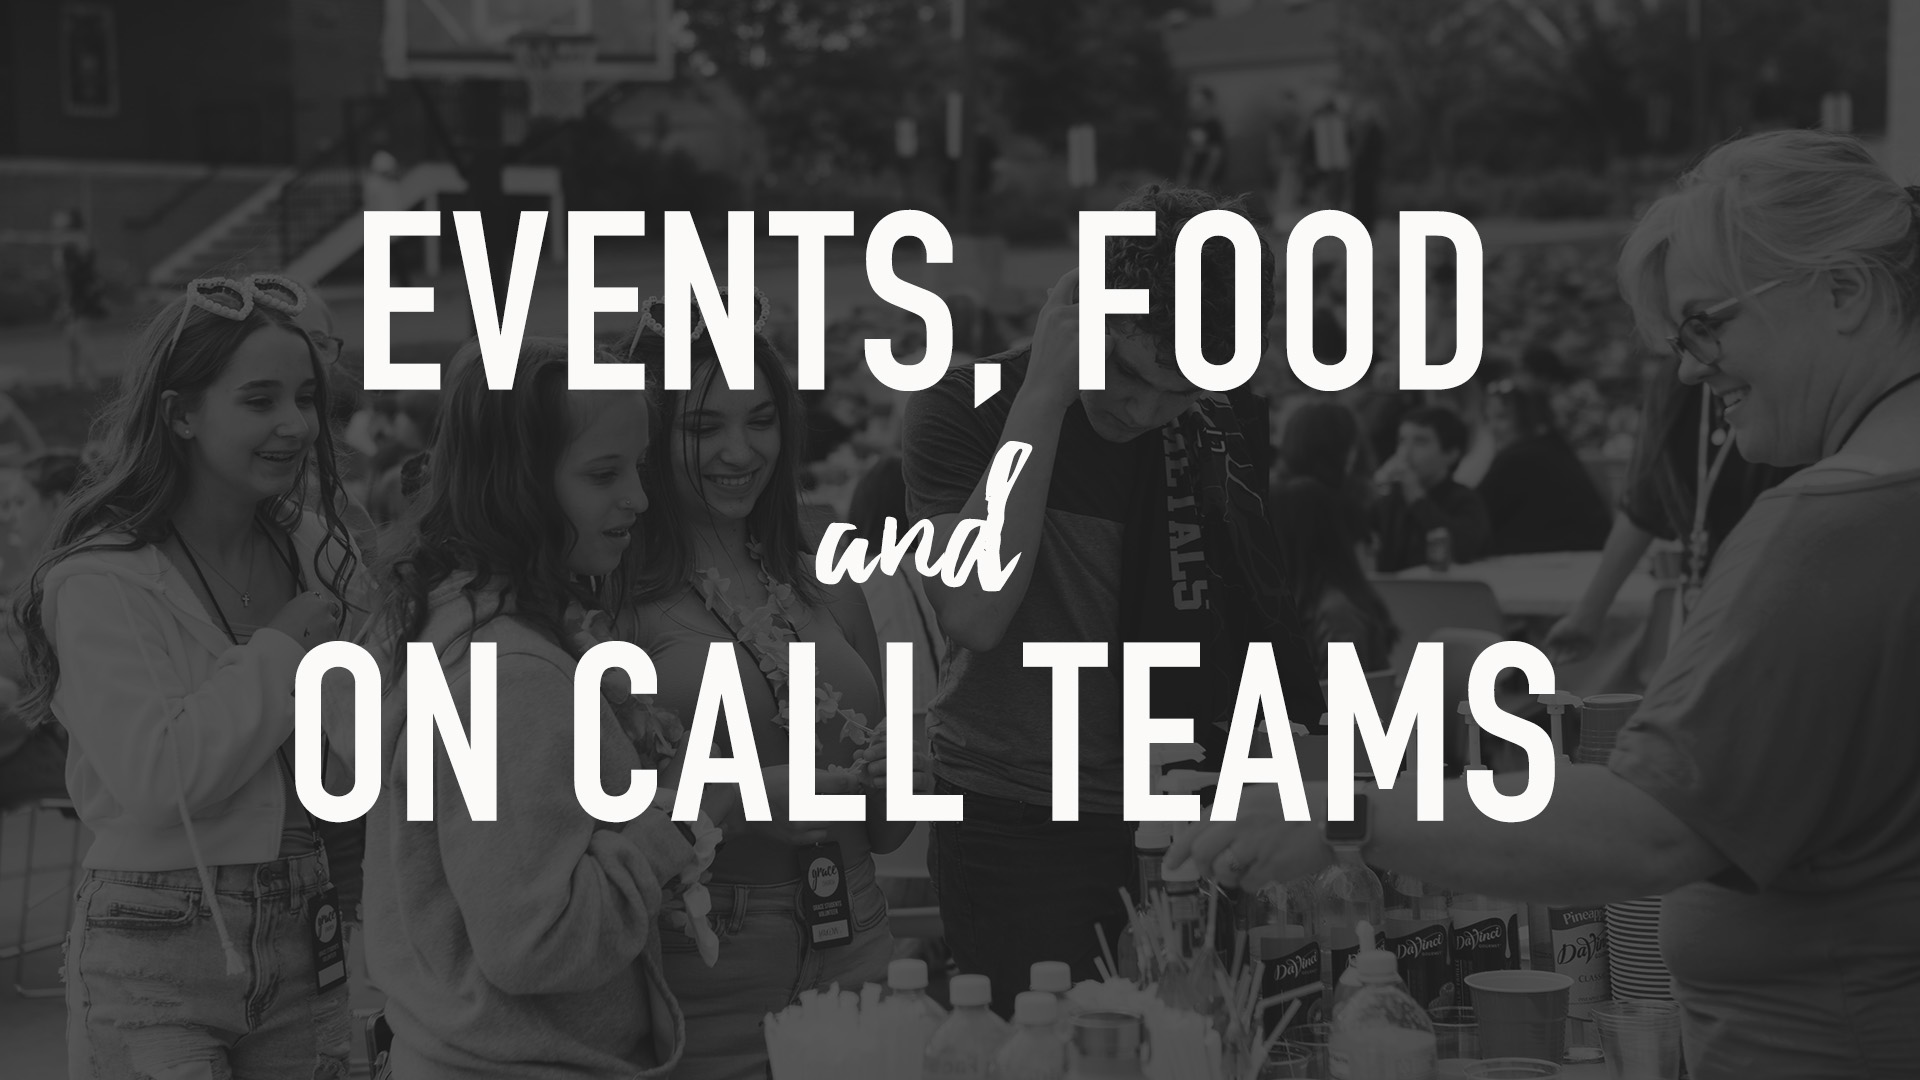 Volunteer for Events, Food & On Call Teams

 
